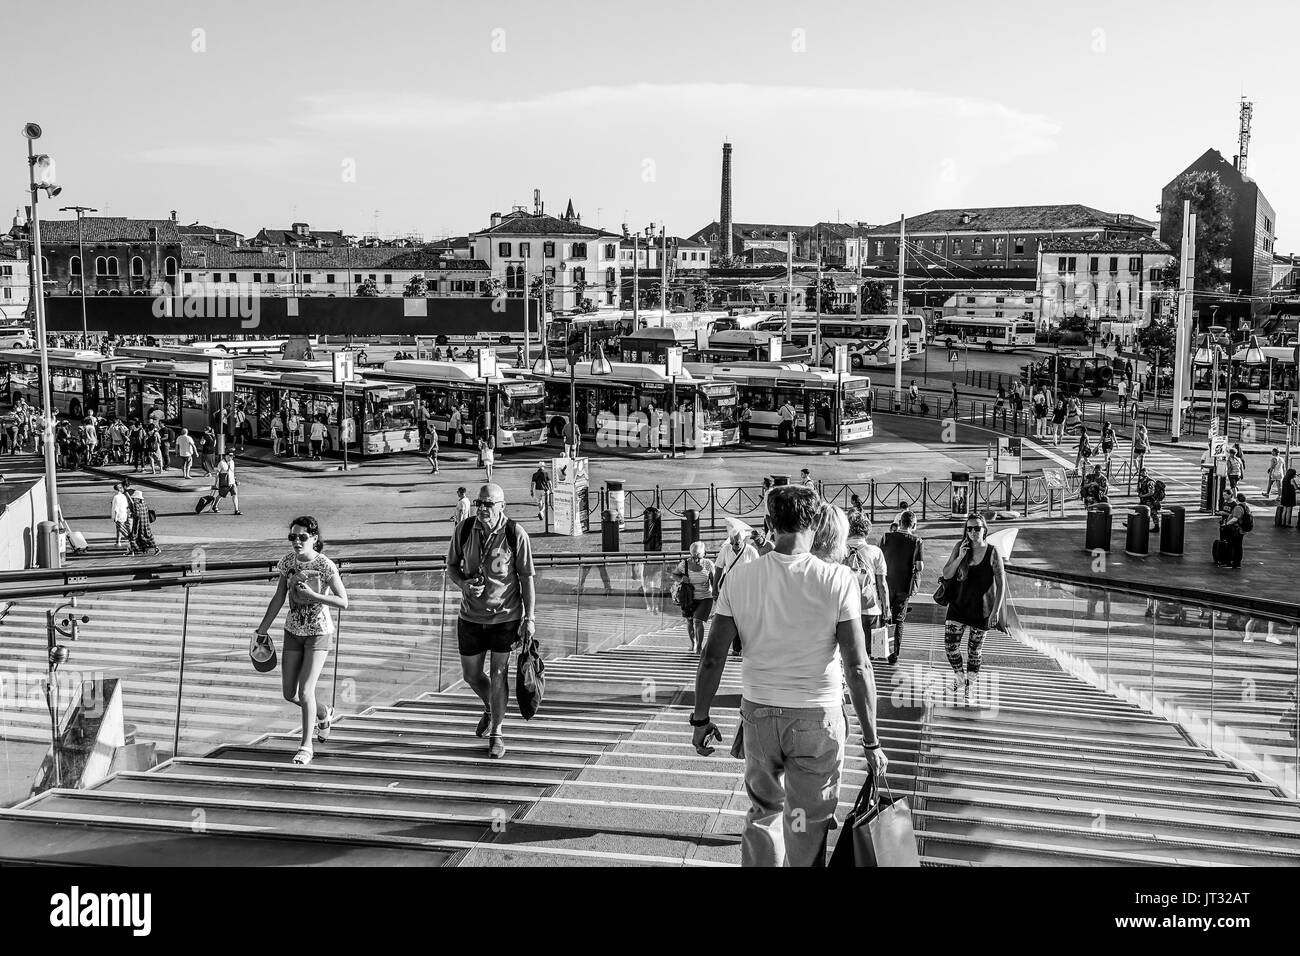 Modern Bridge over Grand Canal in Venice at Piazzale Roma - VENICE, ITALY - JUNE 29, 2016 Stock Photo